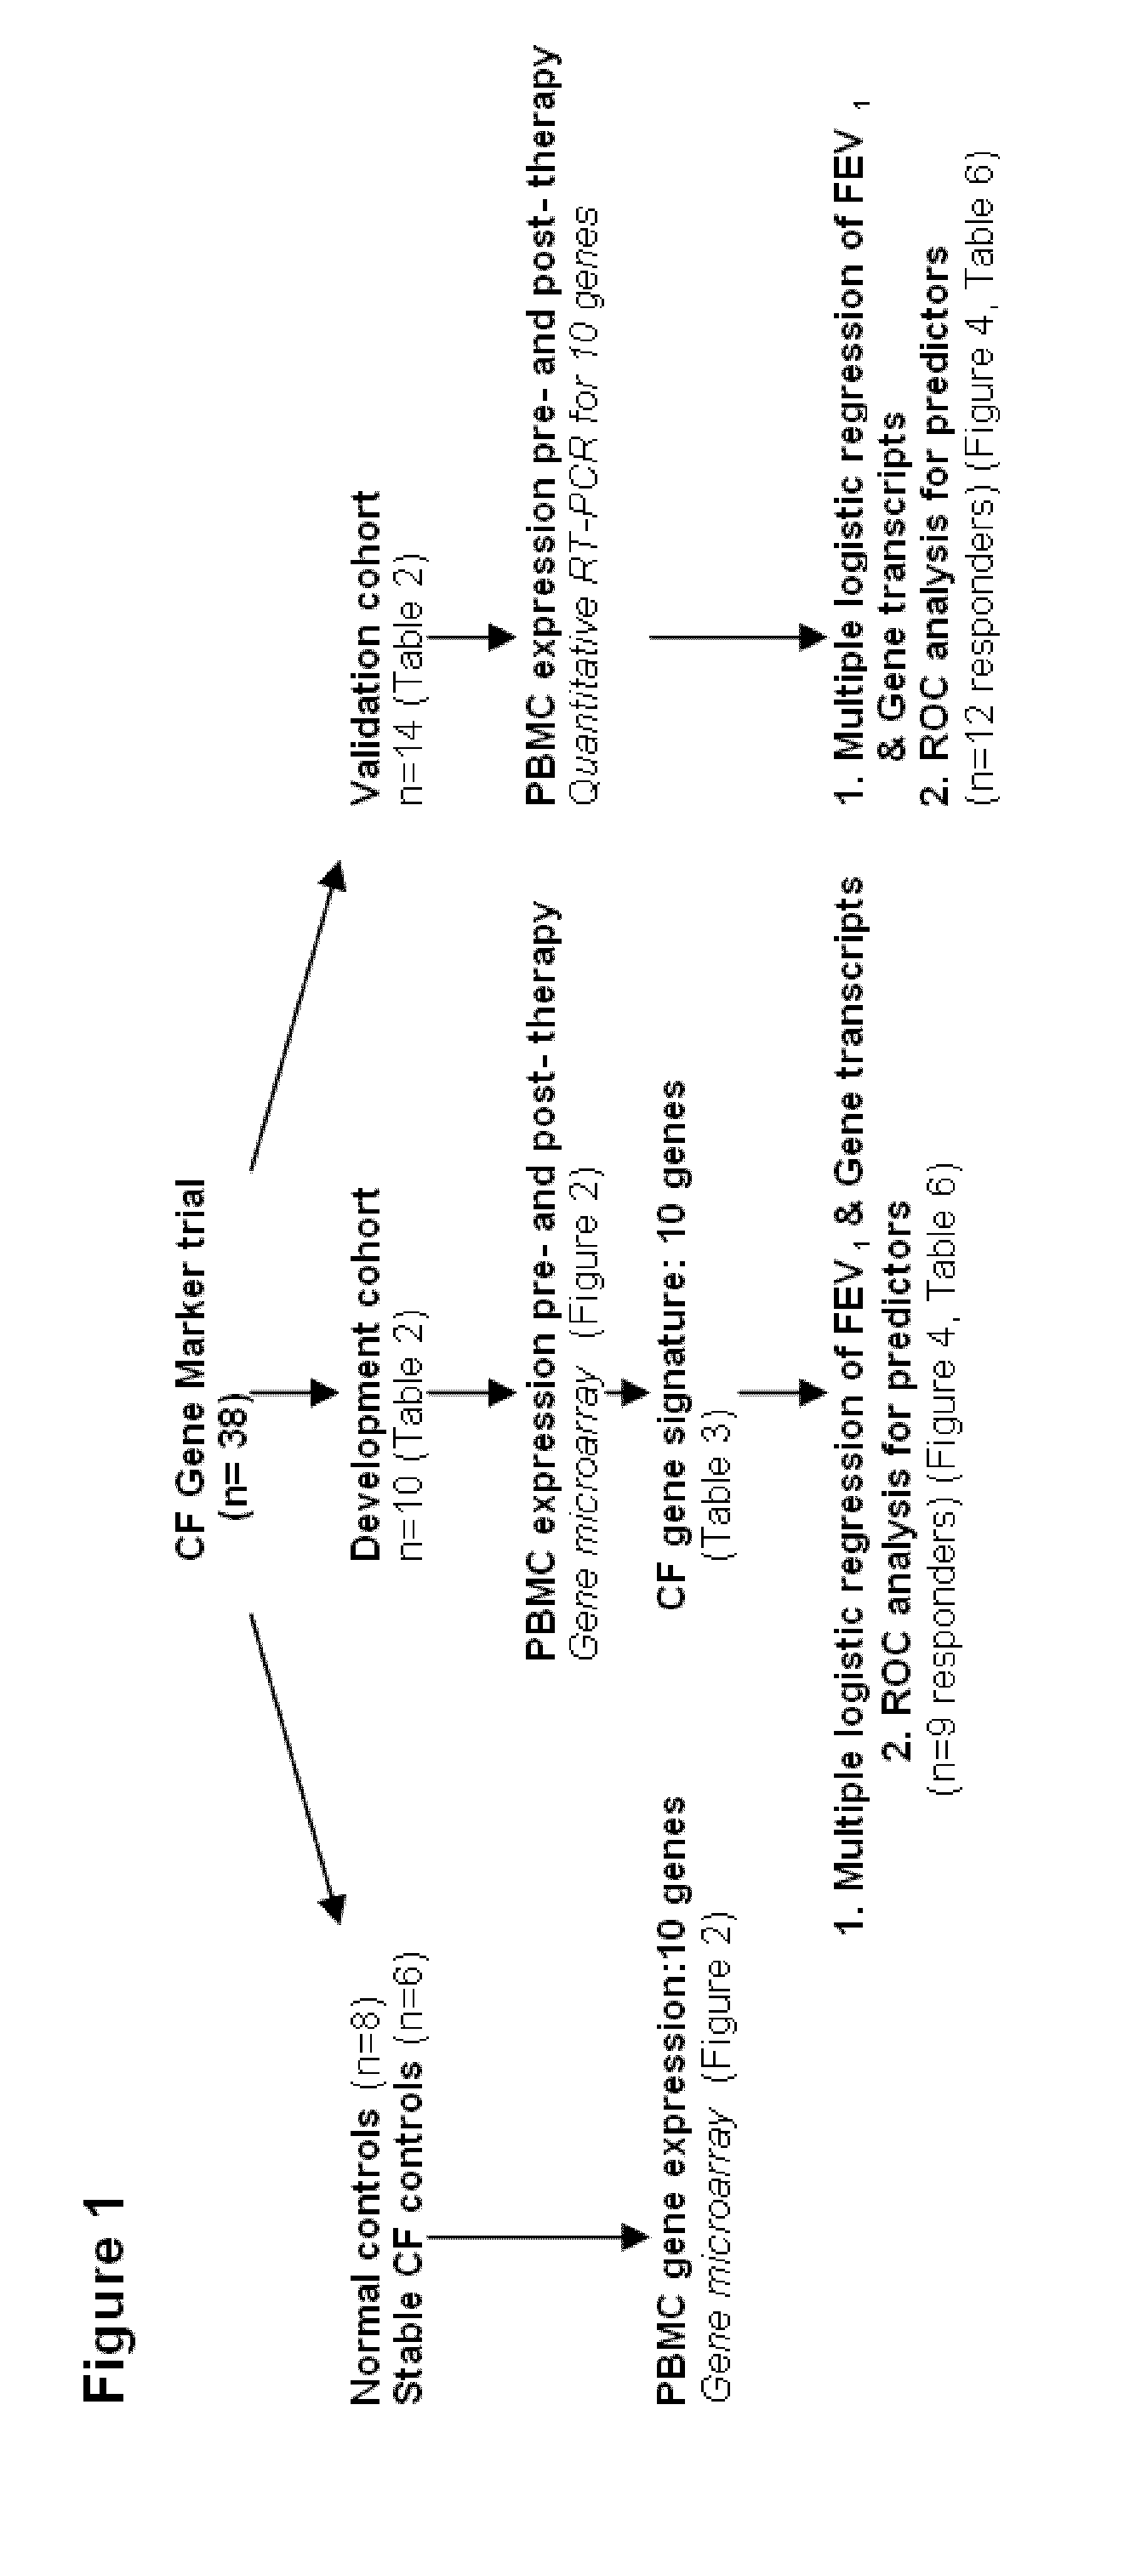 Markers for diagnosis of pulmonary inflammation and methods related thereto